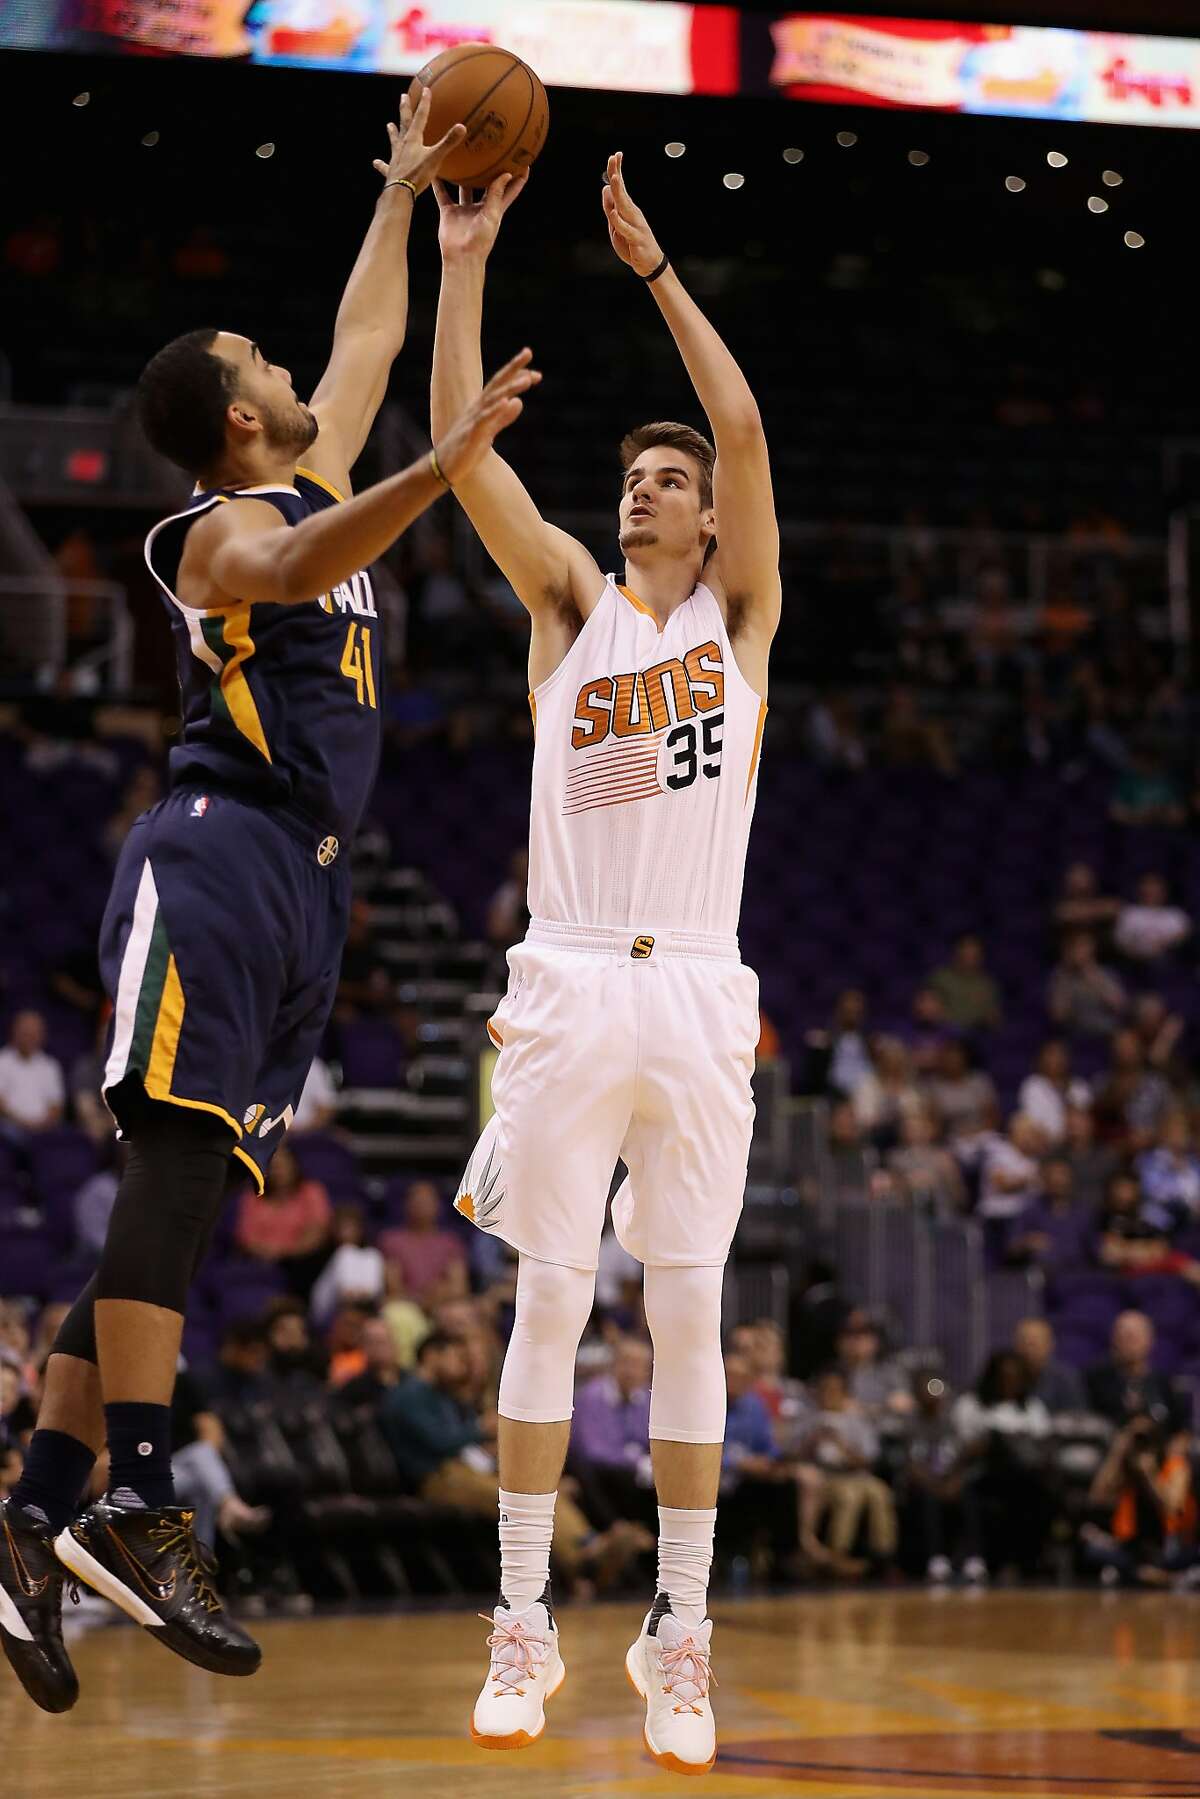 PHOENIX, AZ - OCTOBER 05: Dragan Bender #35 of the Phoenix Suns attempts a shot over Trey Lyles #41 of the Utah Jazz during the first half of the preseason NBA game at Talking Stick Resort Arena on October 5, 2016 in Phoenix, Arizona. NOTE TO USER: User expressly acknowledges and agrees that, by downloading and or using this photograph, User is consenting to the terms and conditions of the Getty Images License Agreement. (Photo by Christian Petersen/Getty Images)